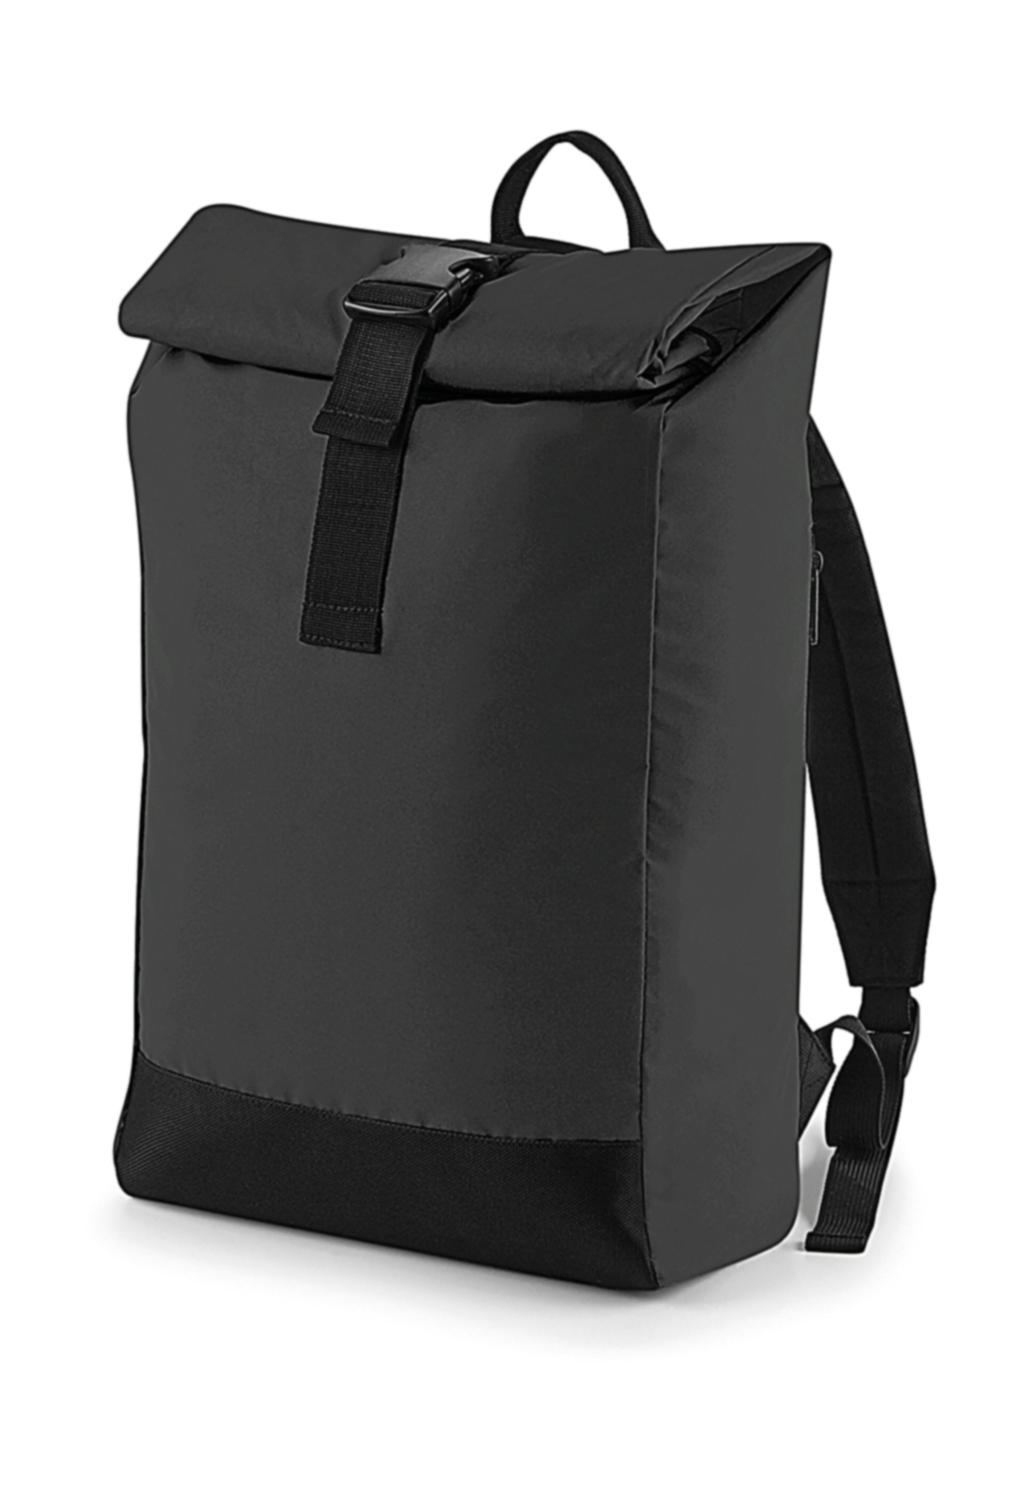  Reflective Roll-Top Backpack in Farbe Black Reflective